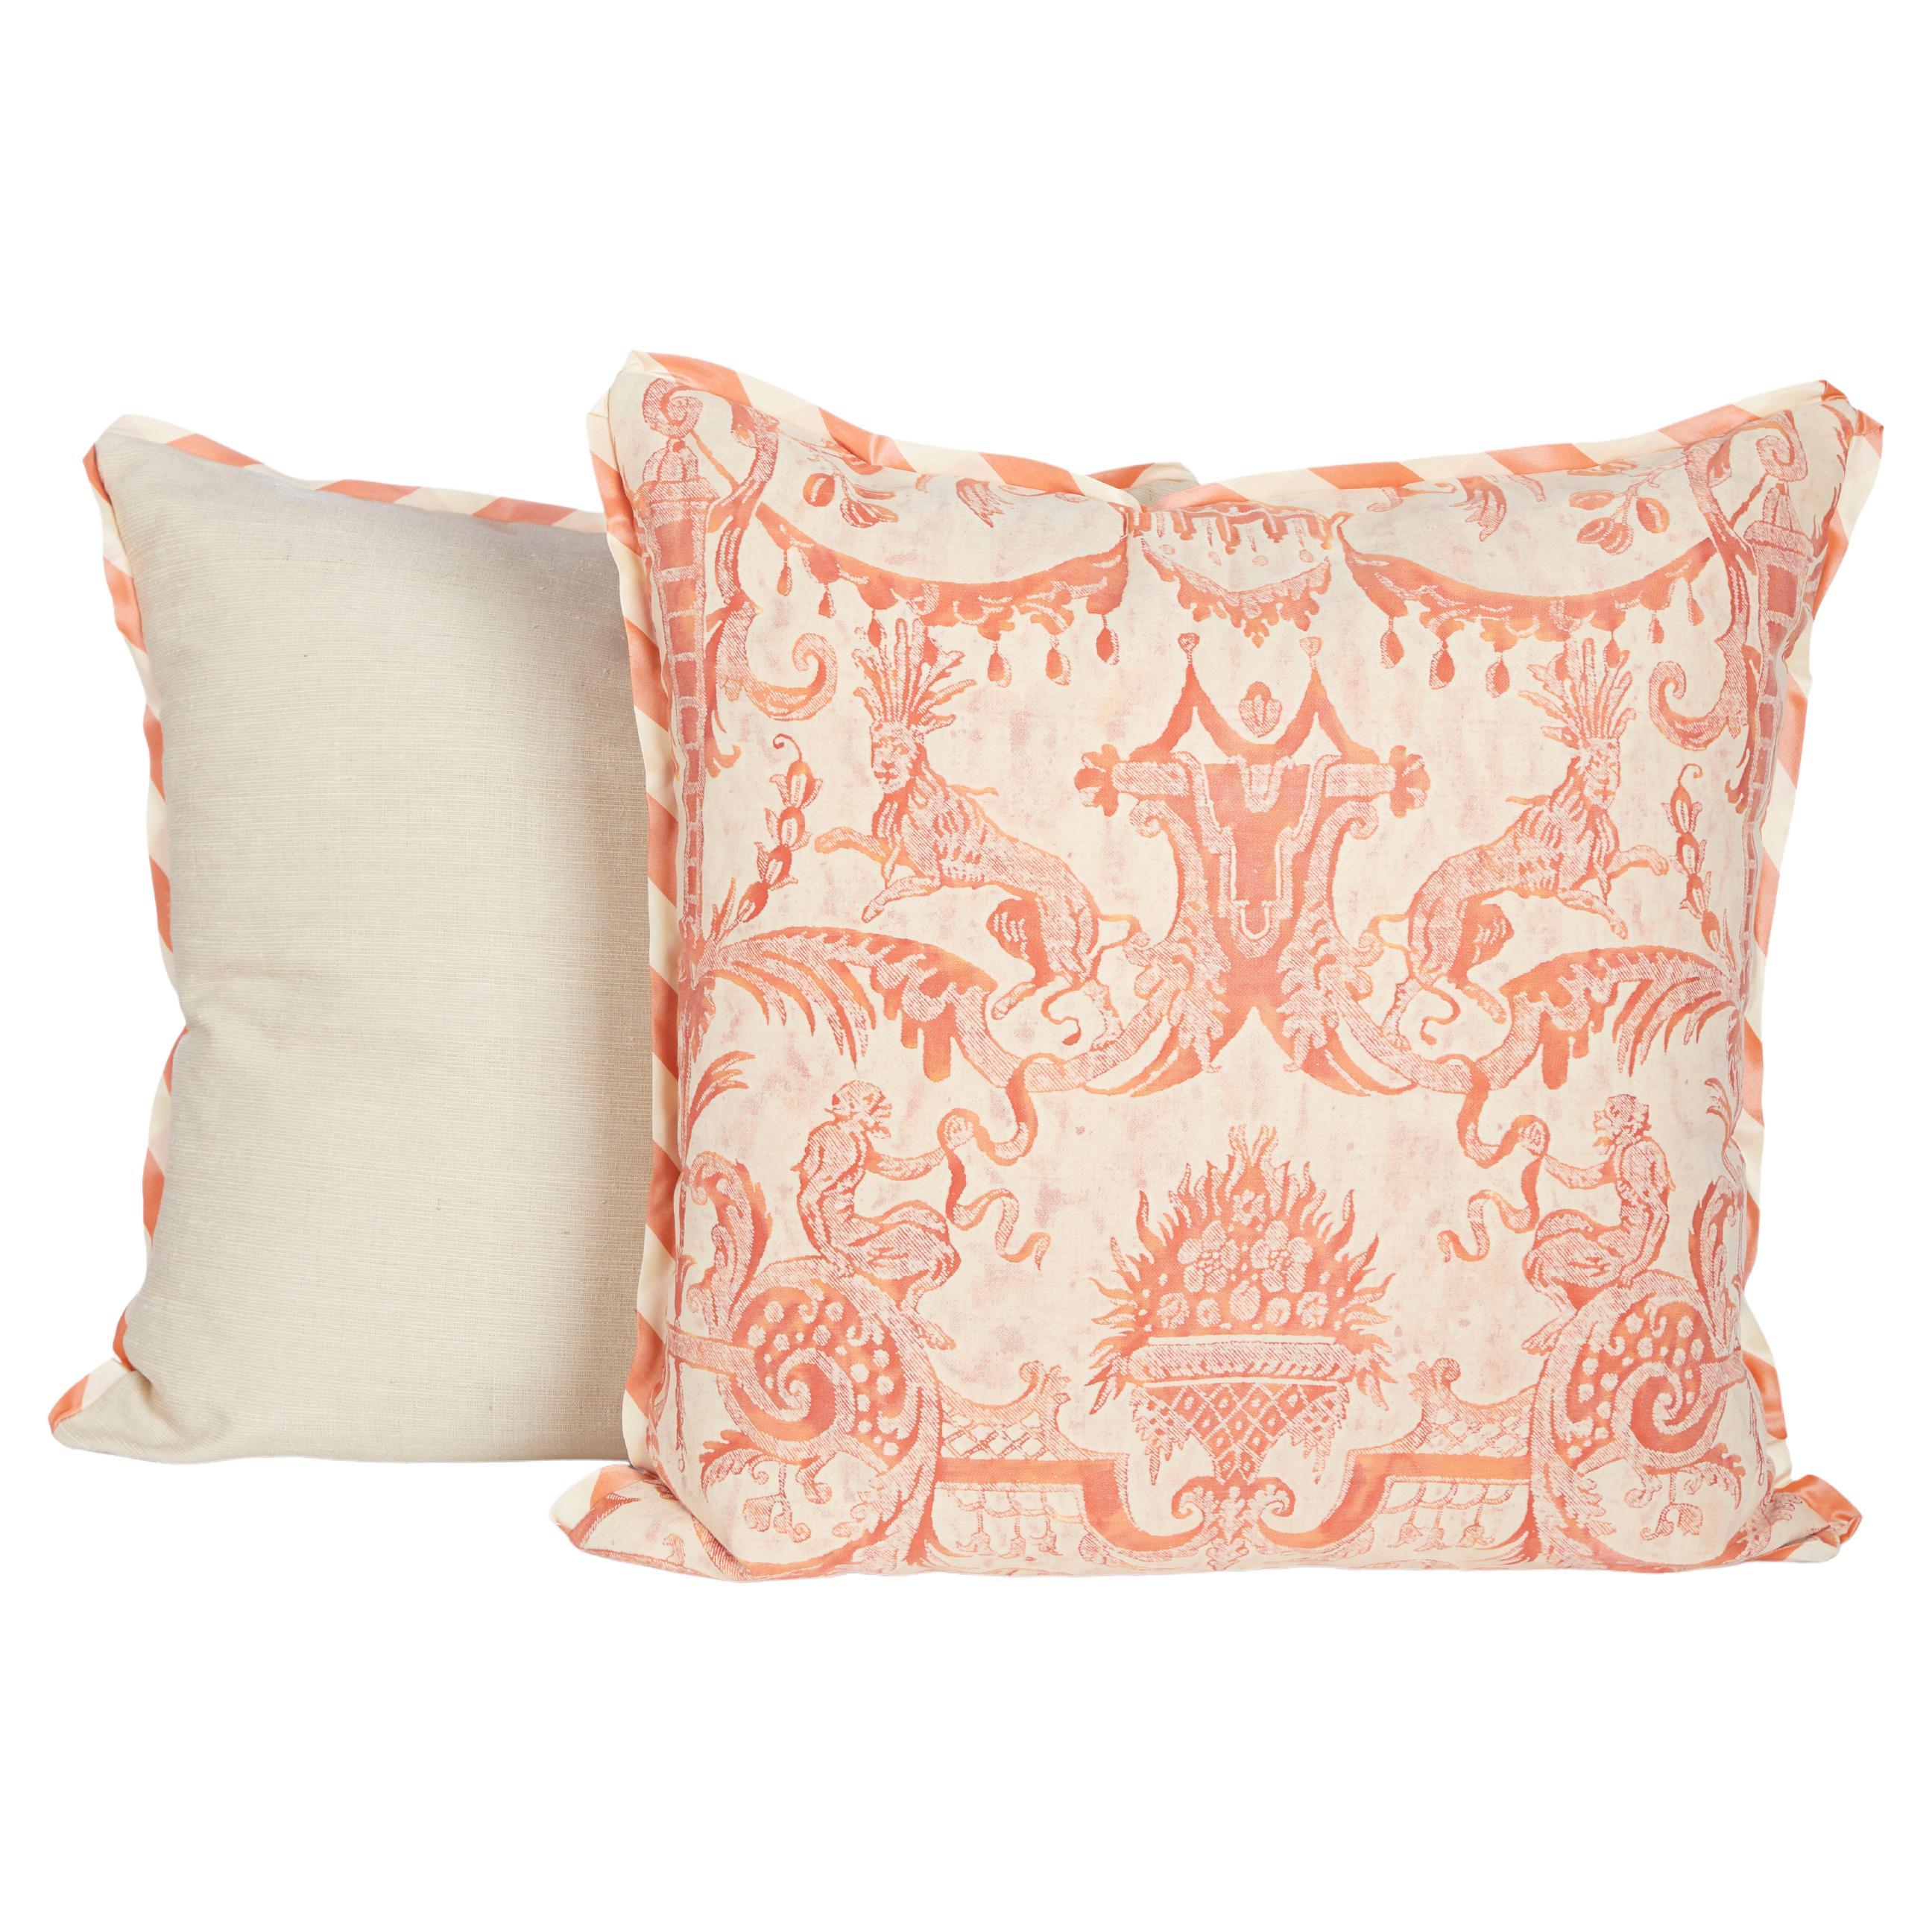 Pair of Fortuny Mazzarino Cushions in Orange and White by David Duncan Studio For Sale